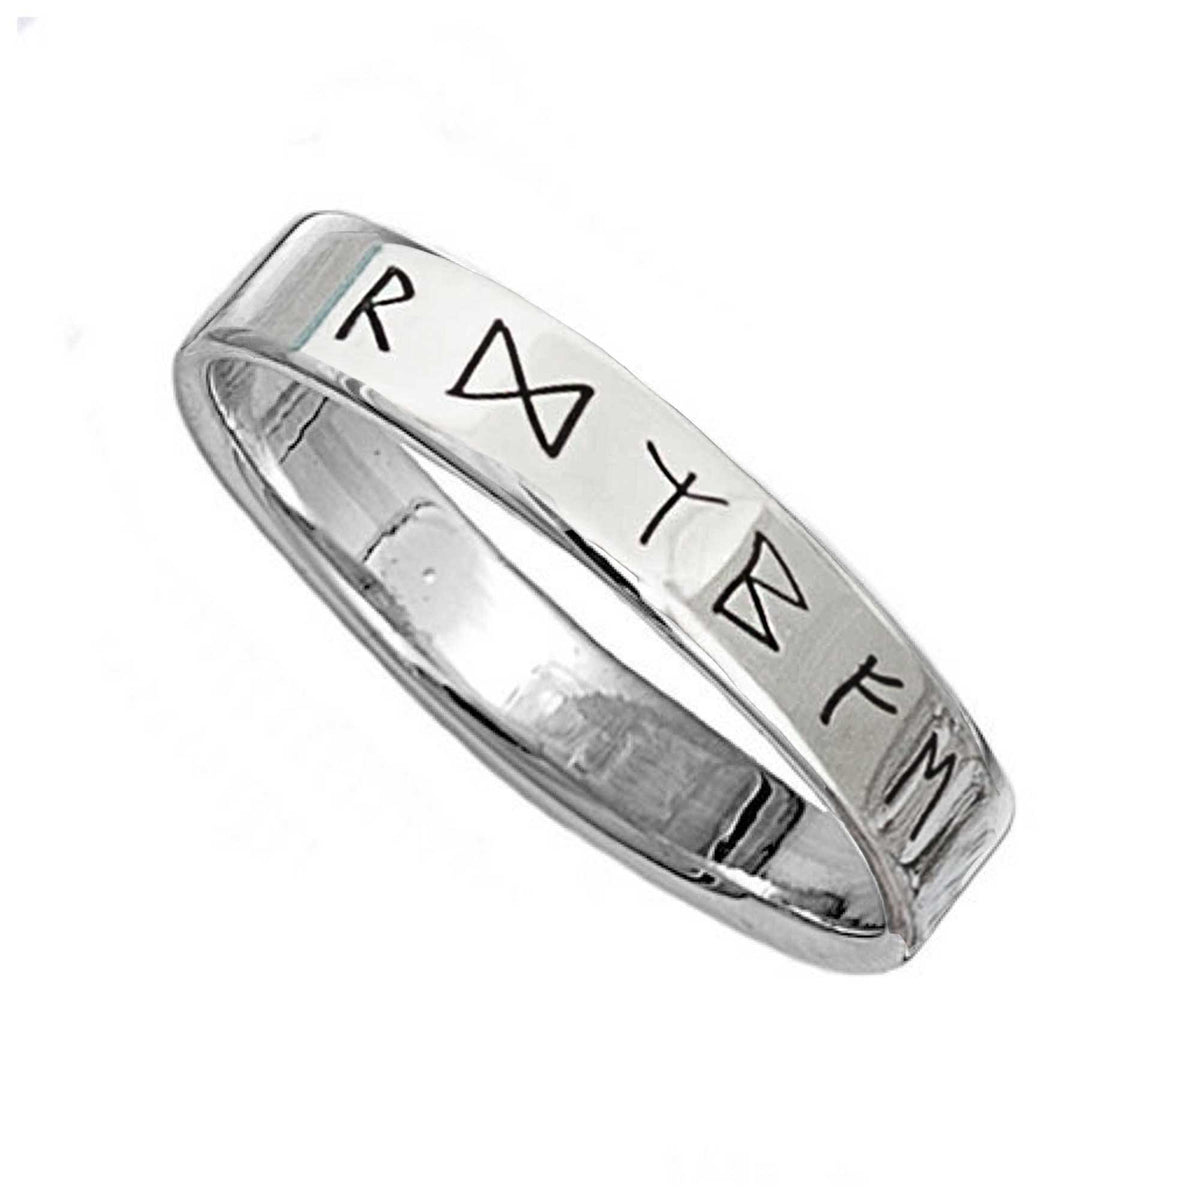 viking rune engraved ring past times style norse runic mens jewellery